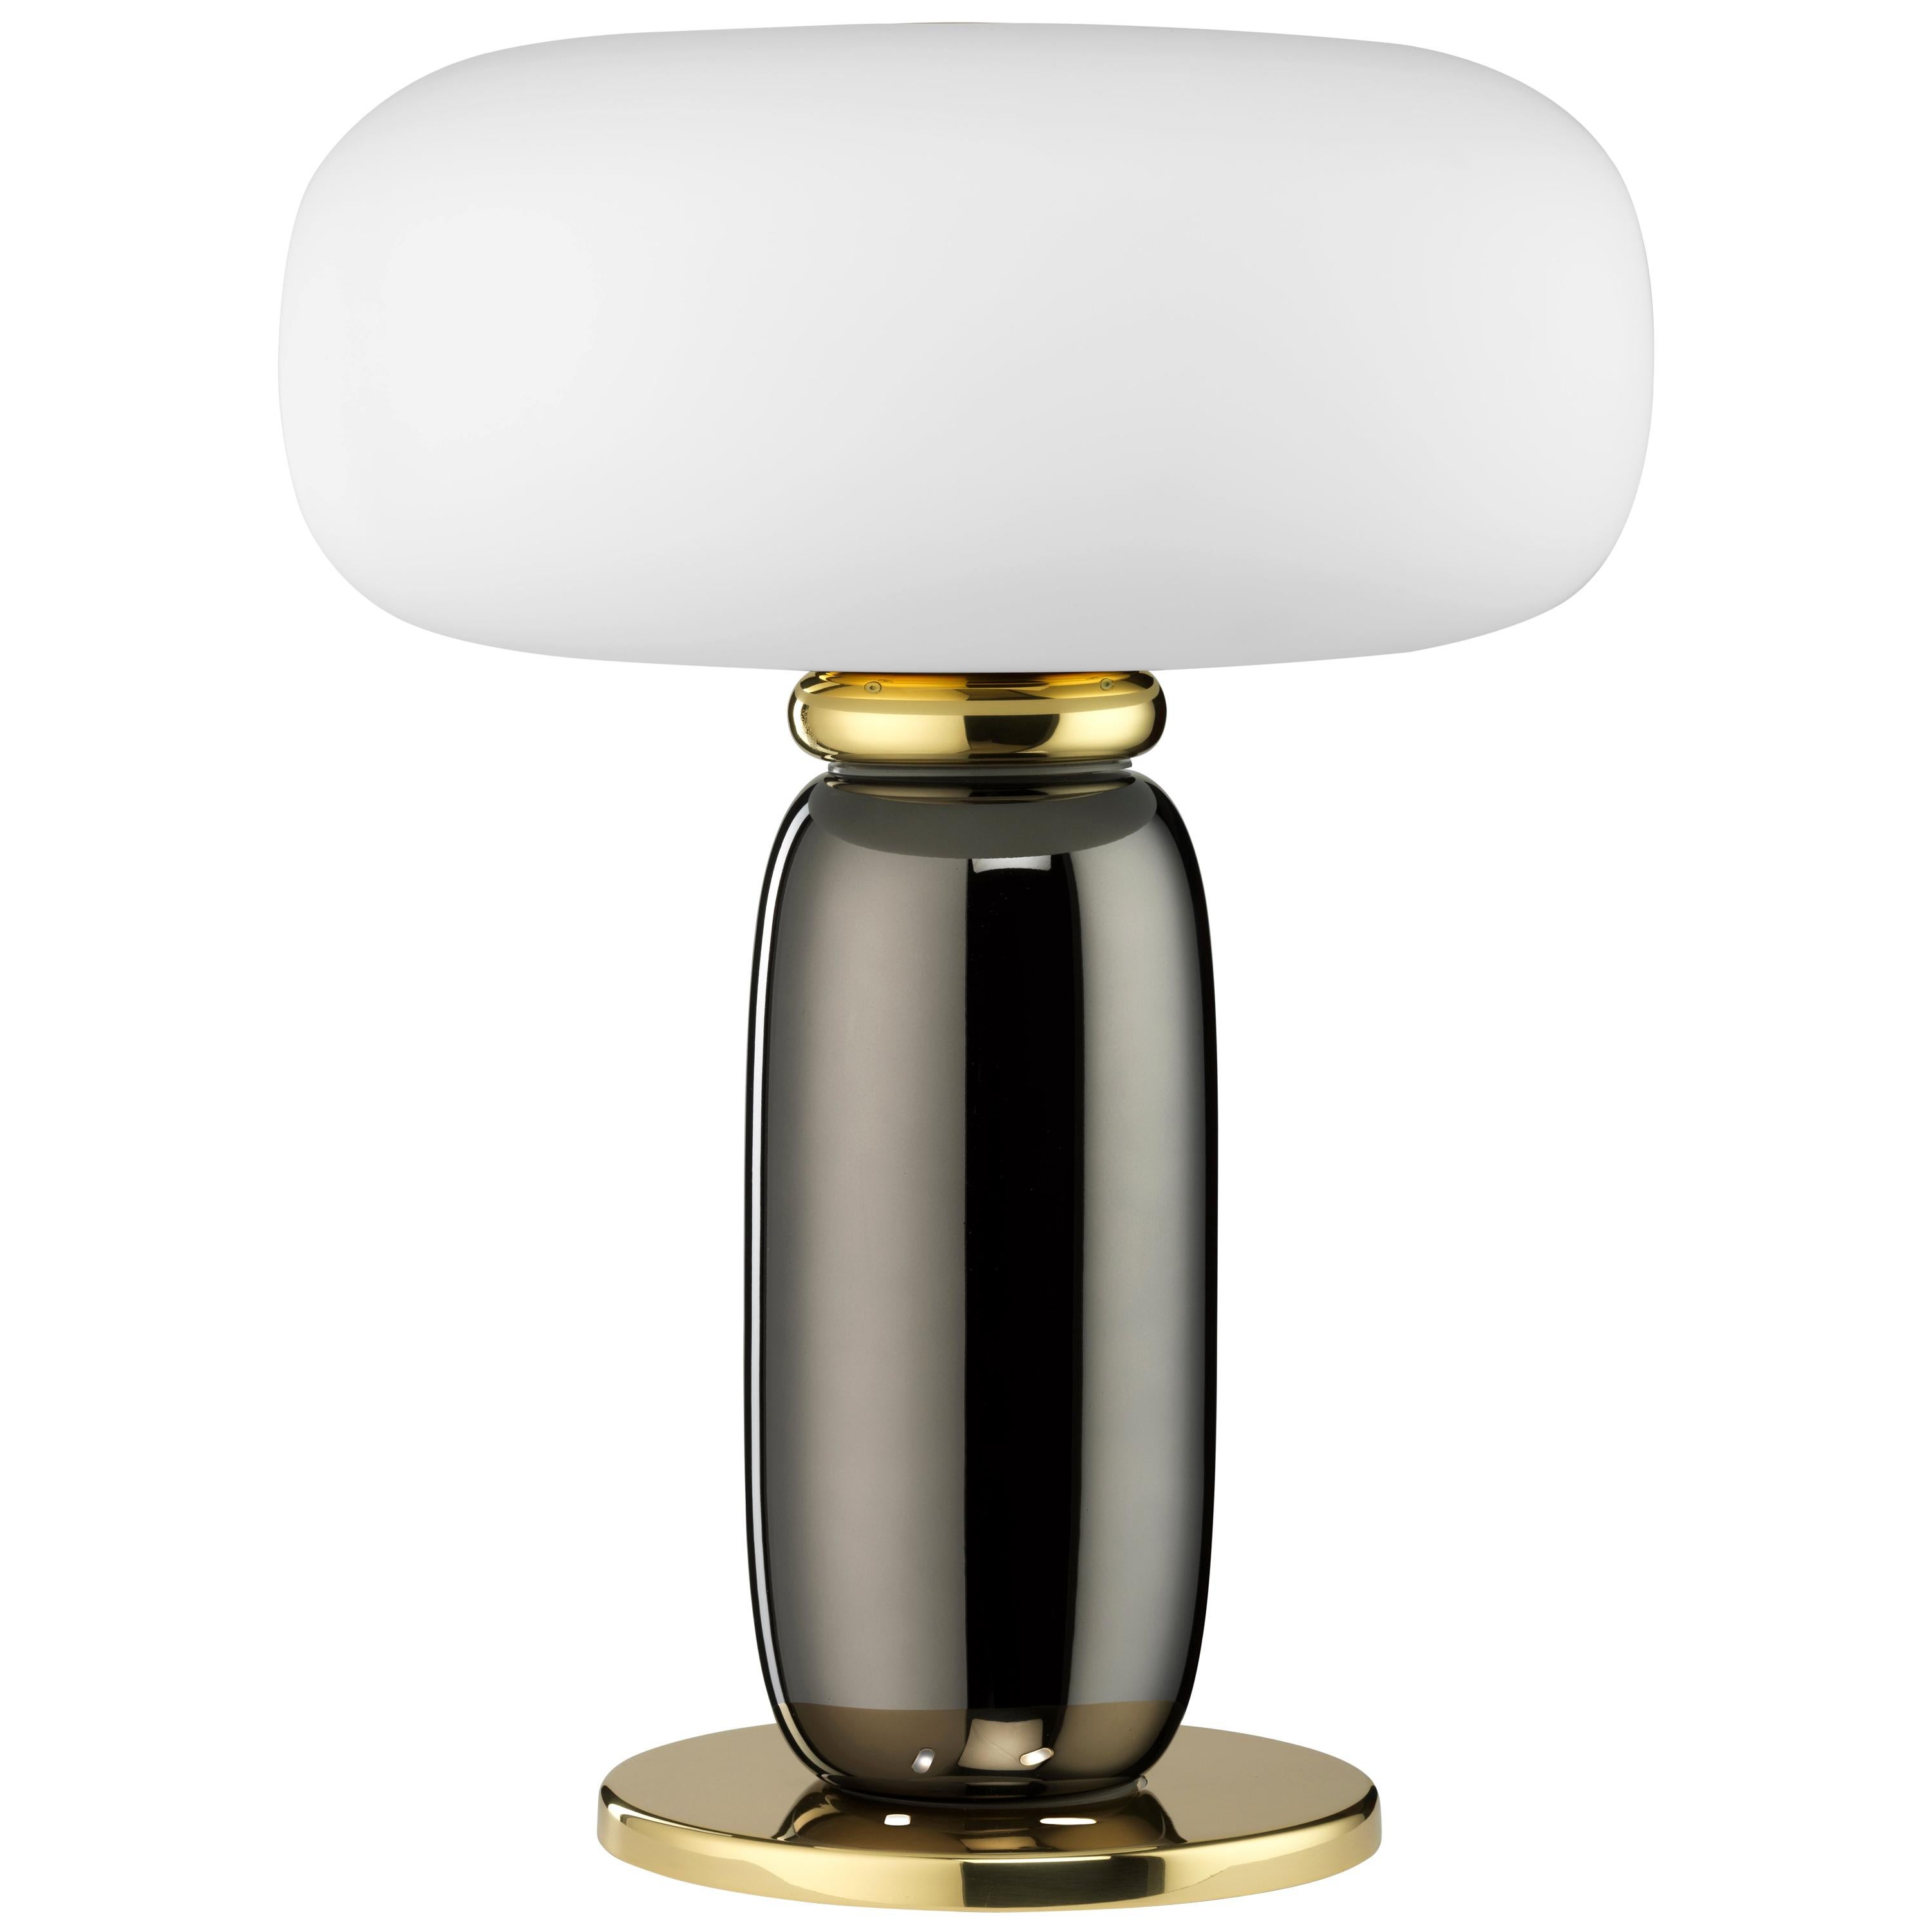 Ghidini 1961 One on One Table Lamp in Polished Brass and Glass by Branch